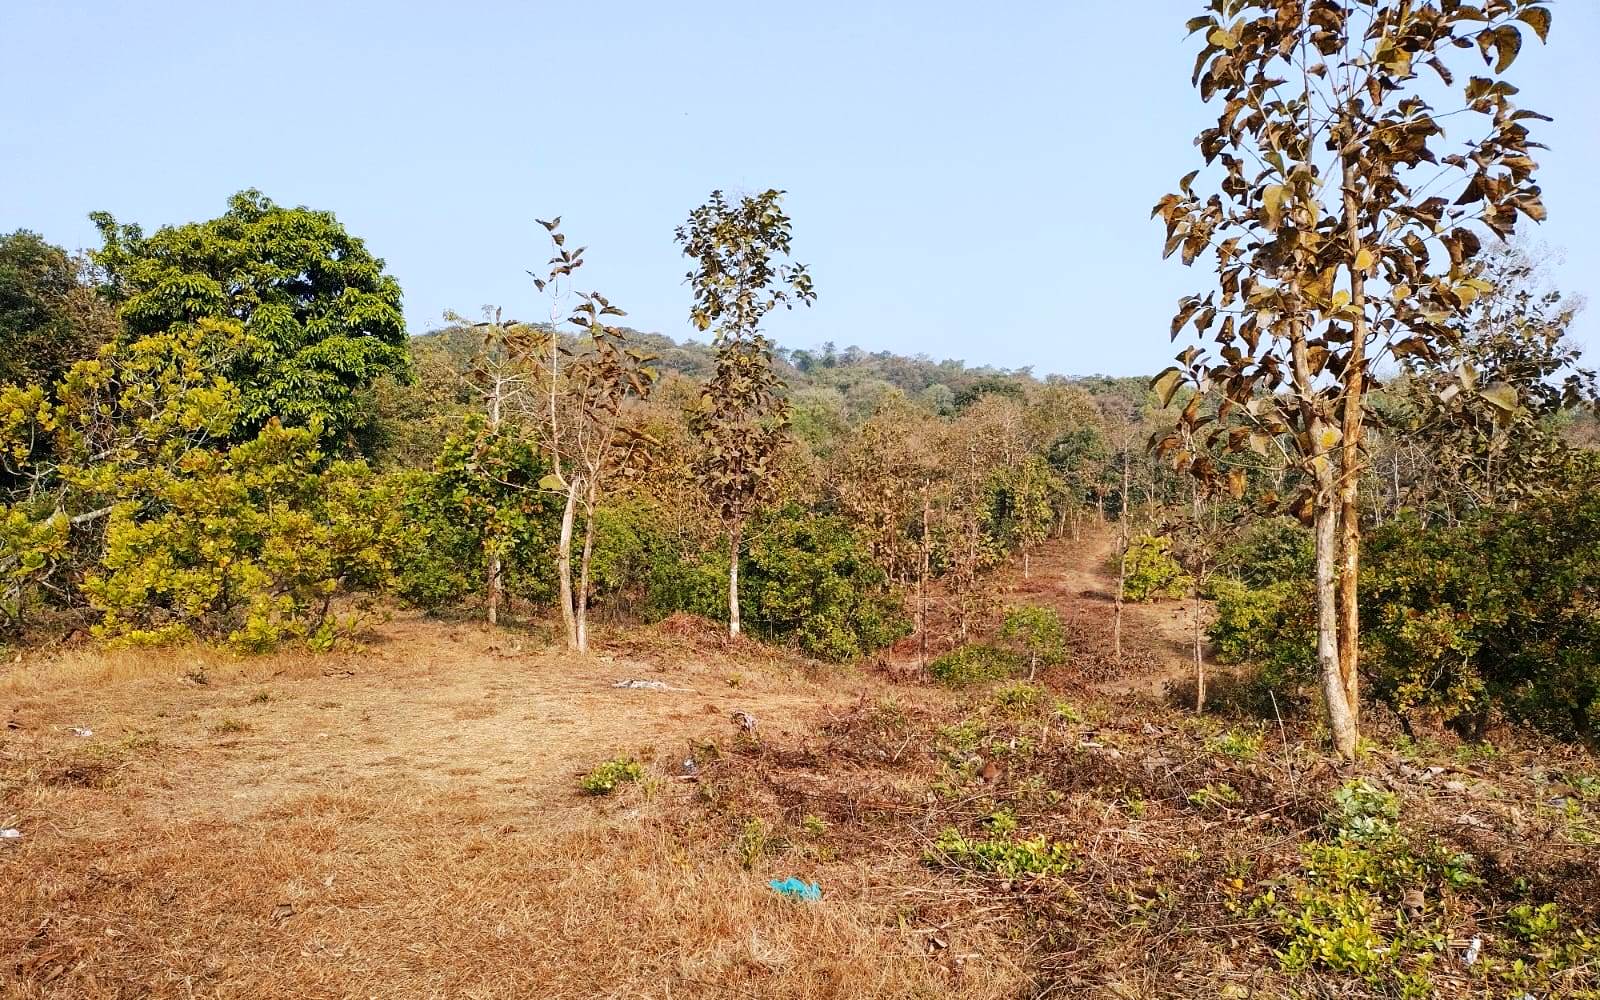 Sea Facing Land bank For Sale In Goa Beach Touch Property Prime Location For Hotel Resort or Bungalow Farmhouse project